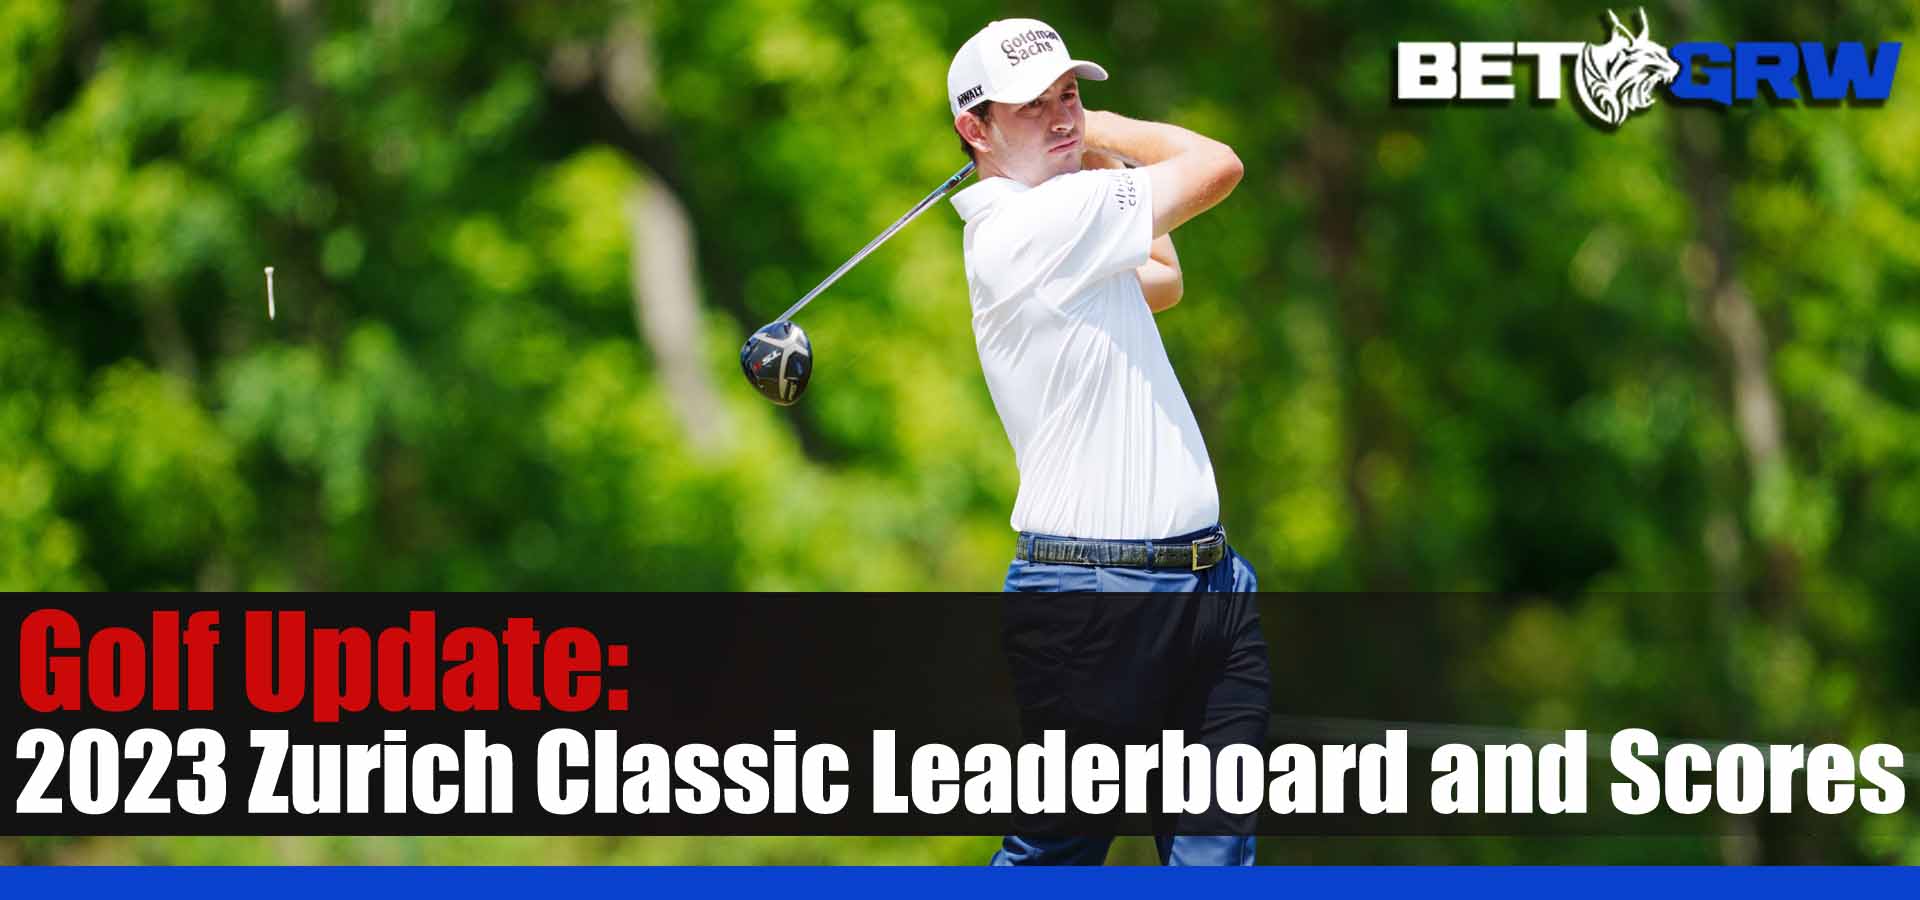 2023 Zurich Classic Leaderboard and Scores Patrick Cantlay and Xander